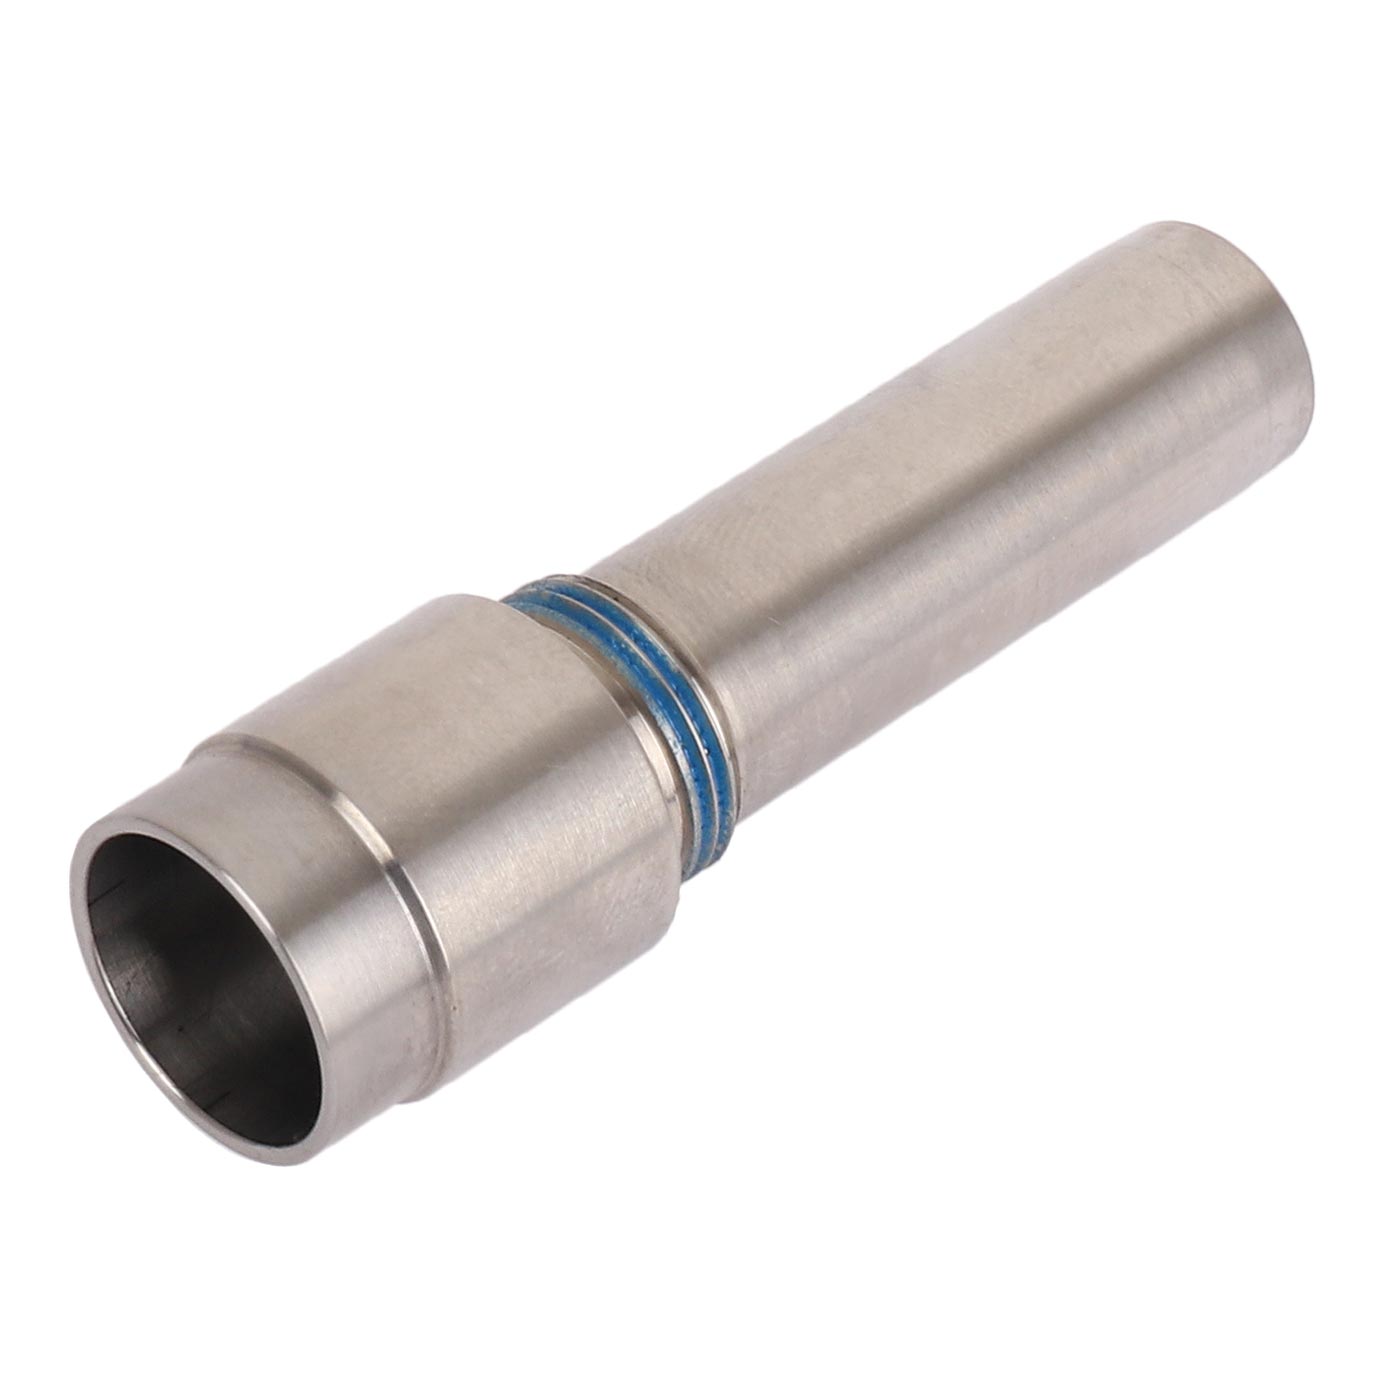 Picture of Crankbrothers Titanium Axle Sleeve for Eggbeater 11 Pedals as from 2011 - #13081